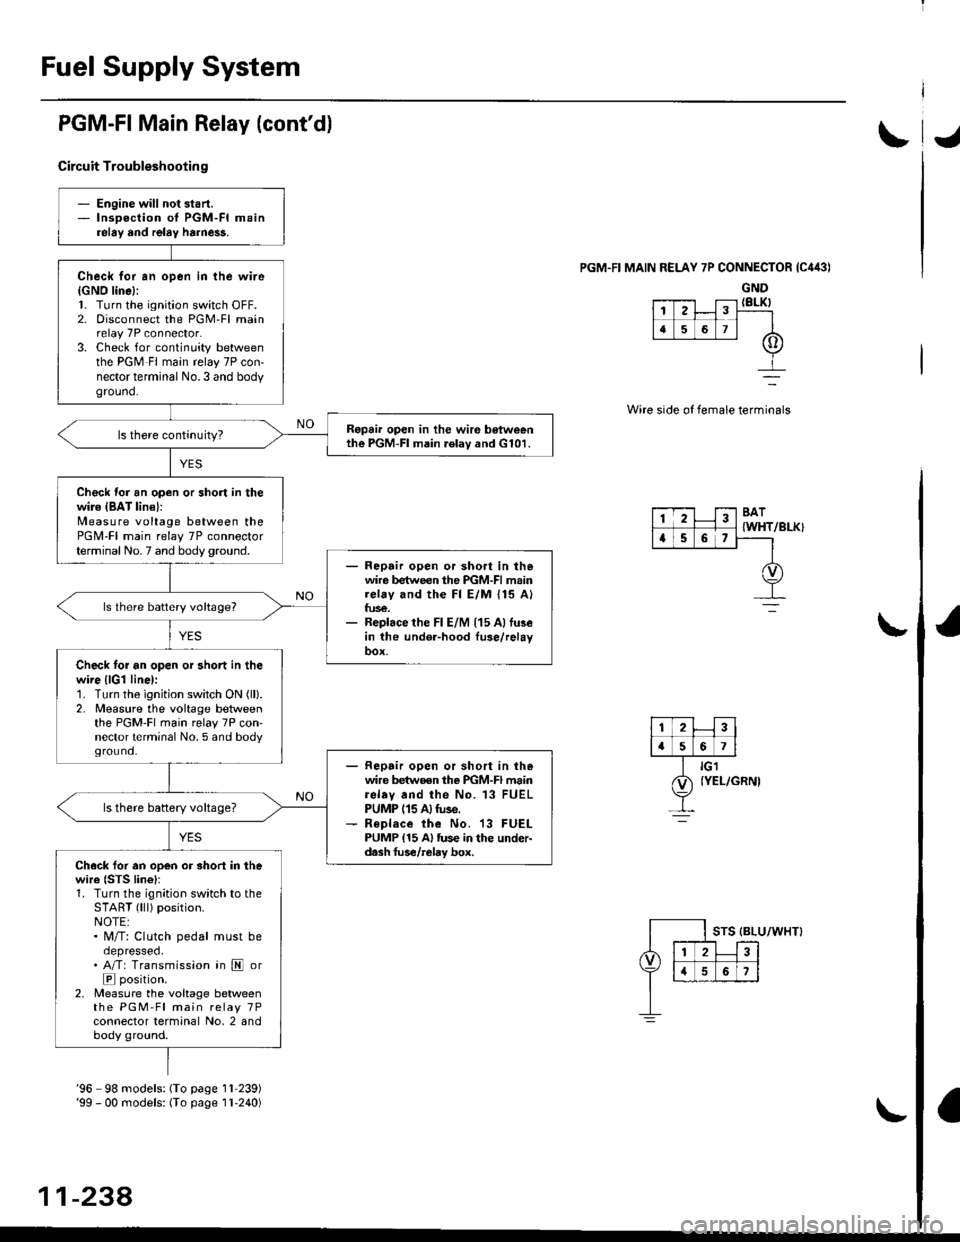 HONDA CIVIC 2000 6.G Service Manual Fuel Supply System
PGM-FI Main Relay (contdl
Circuit Troubleshootin g
PGM.FI MAIN RELAY 7P CONNECTOR {C443)
GND{8LK)
Wire side of female terminals
/BLK}
- Engine will not start.- lnsoection of PGM-FI